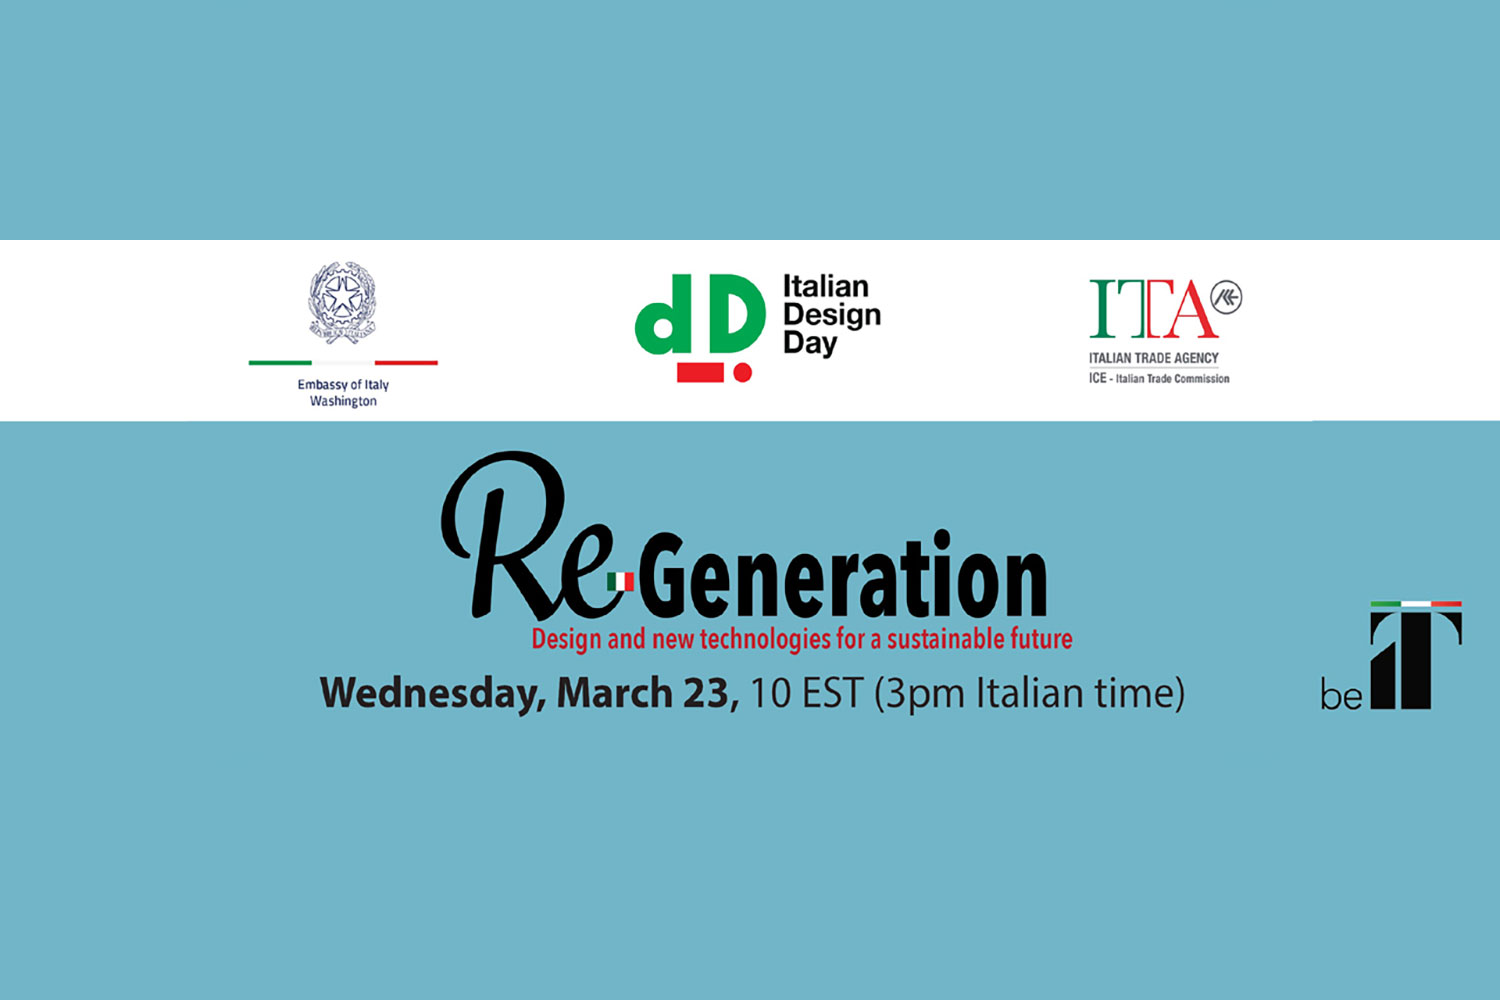 Promotional graphic for Italian Design Day 2022 with the logo and text "Regeneration" and date "Webnesday March 23, 10AM EST (3pm Italian Time)